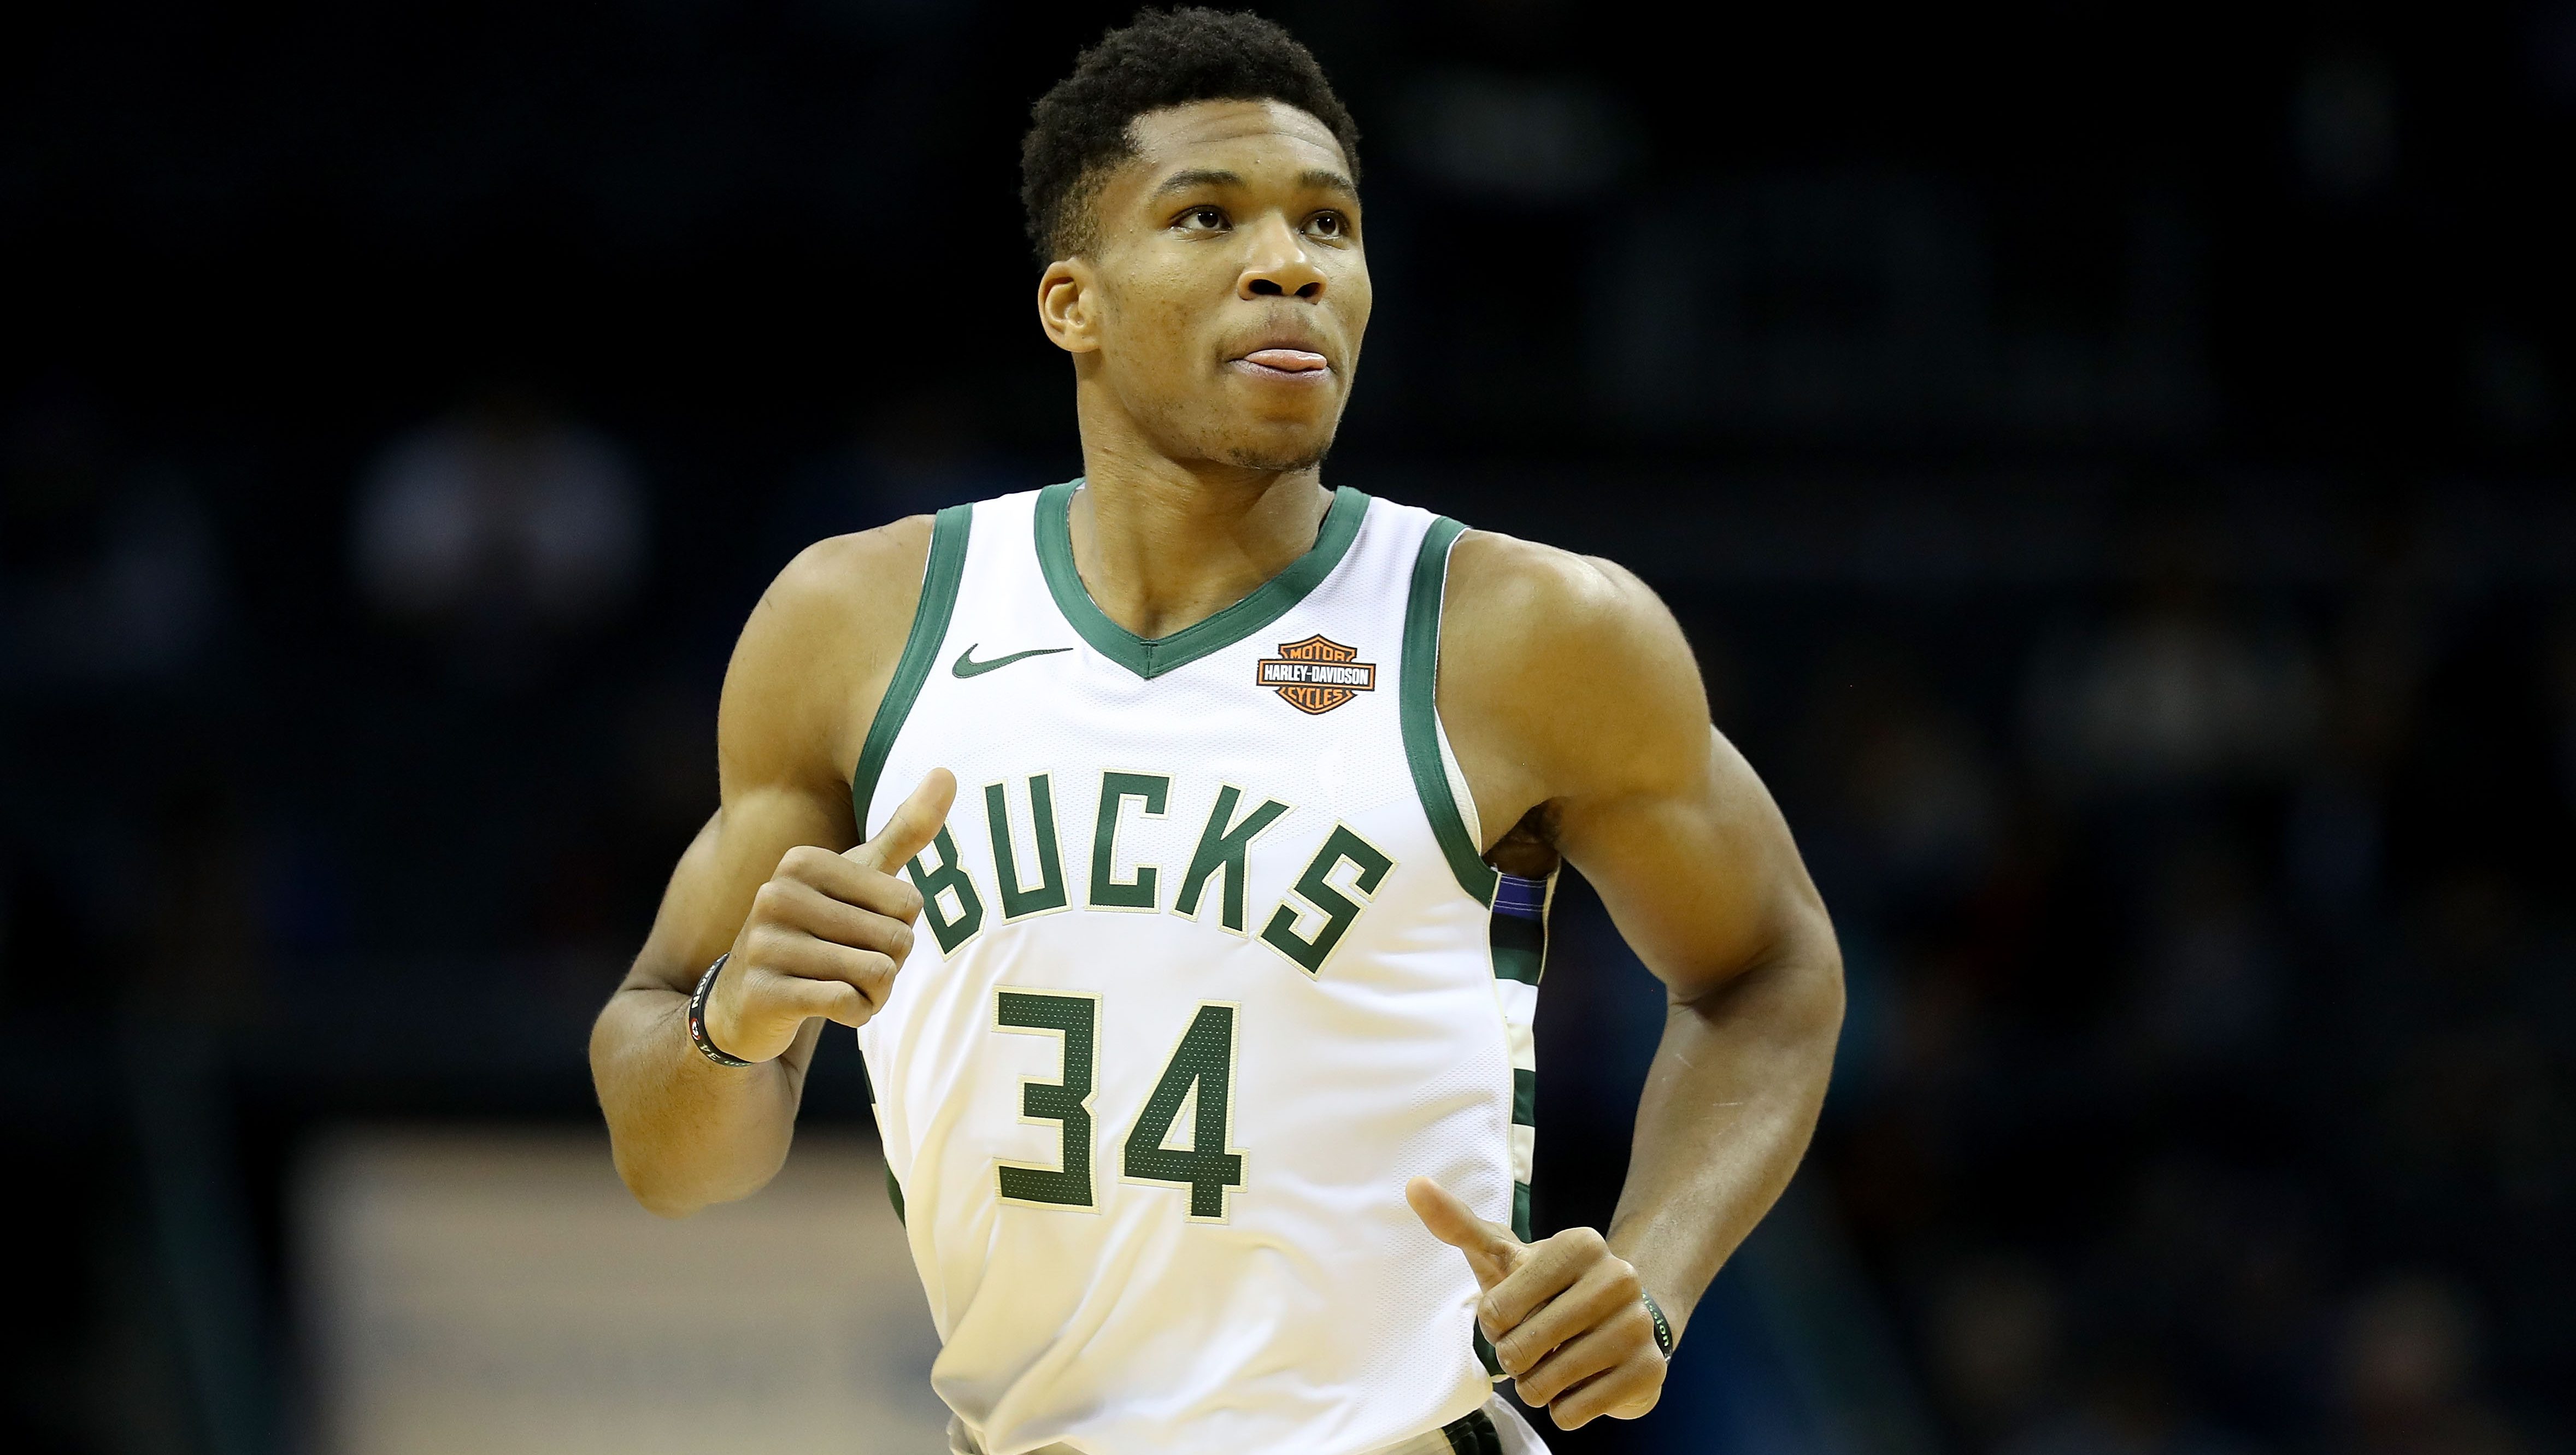 Celtics vs Bucks Live Stream How to Watch Without Cable